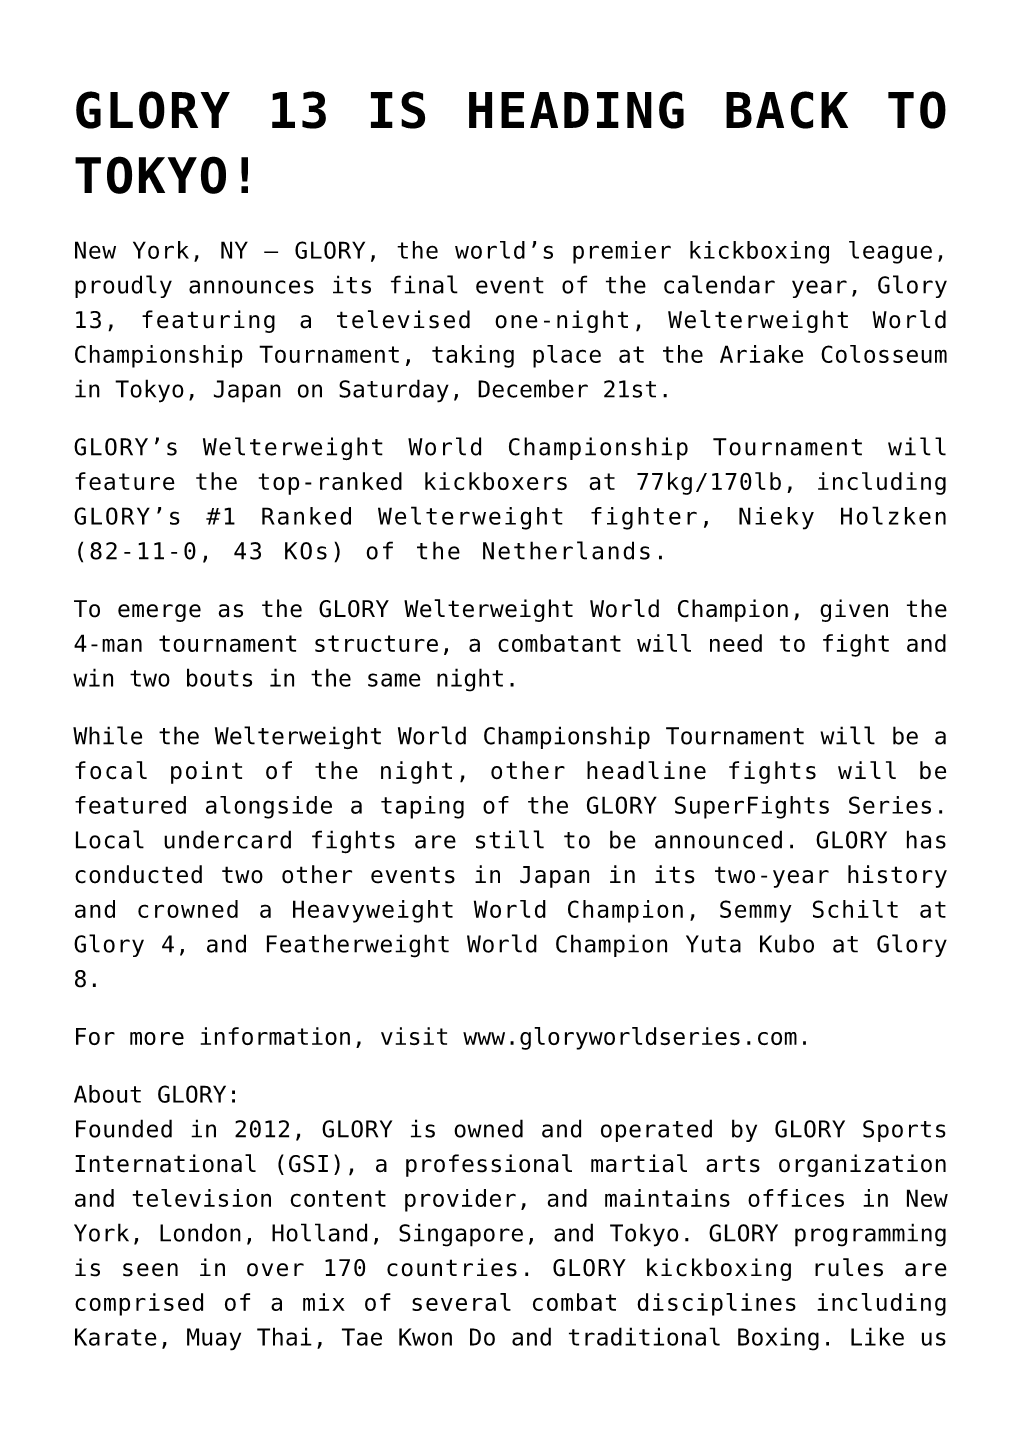 Glory 13 Is Heading Back to Tokyo!